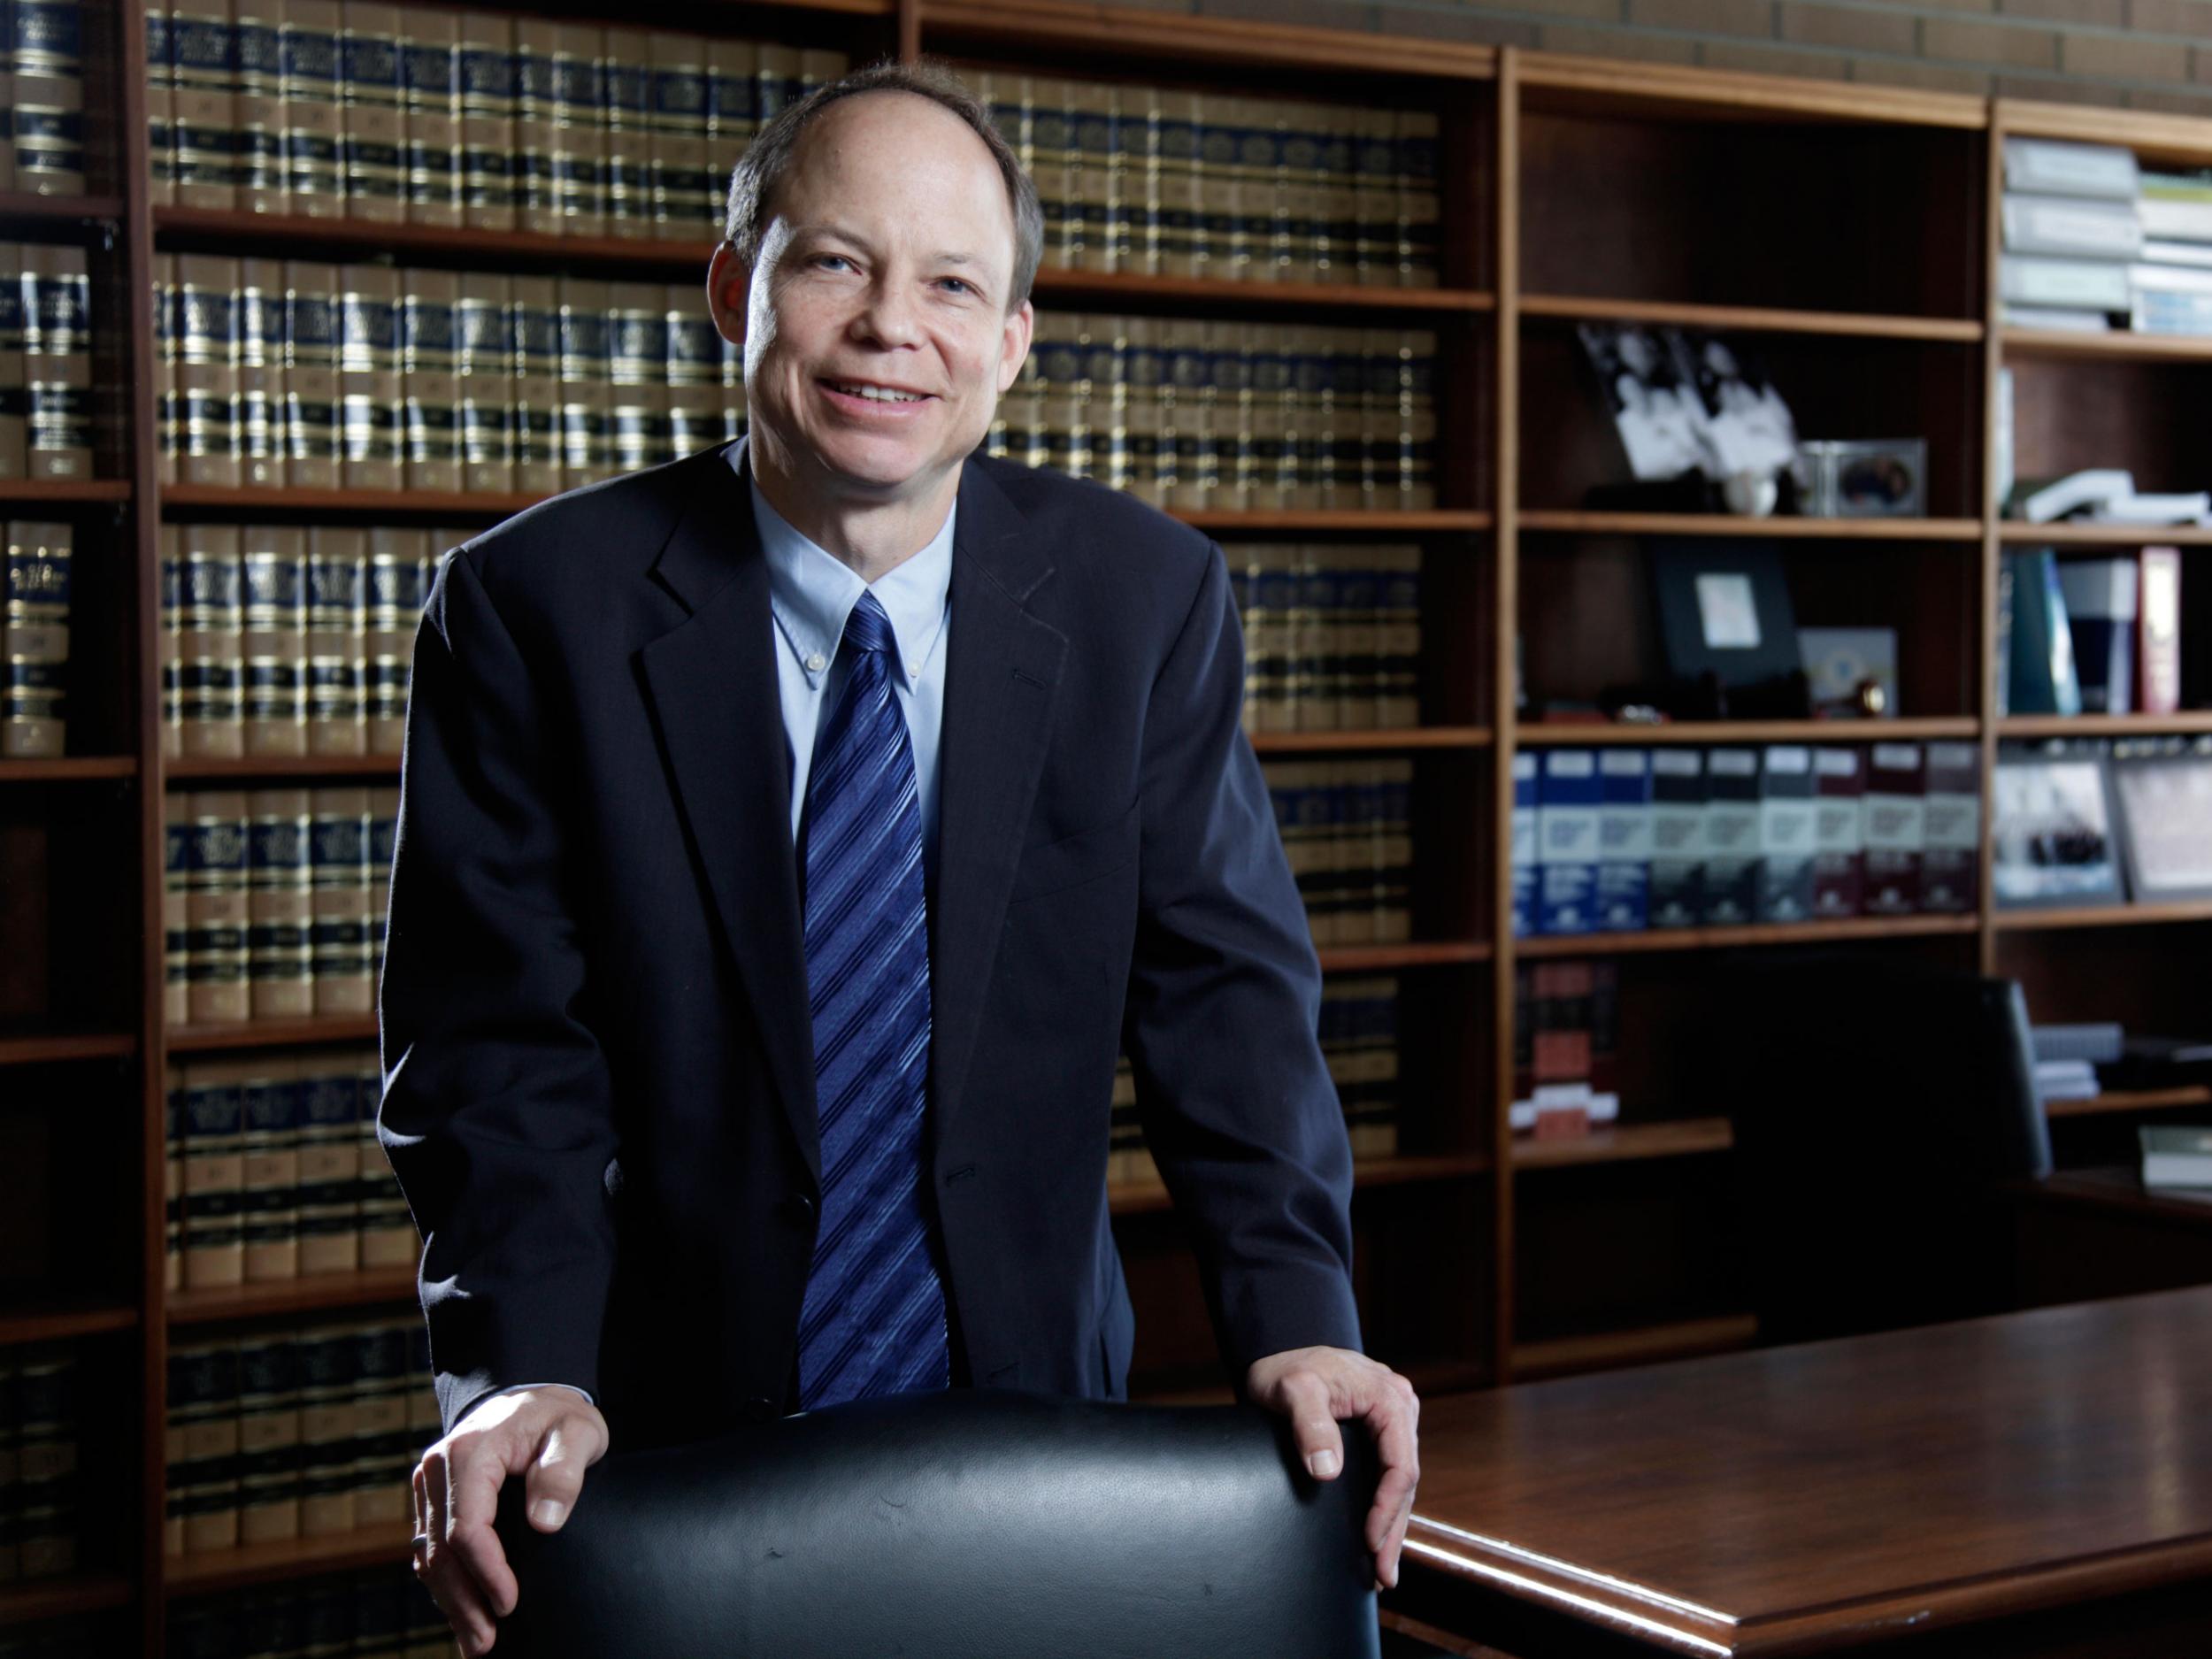 Many people felt Judge Persky's sentence was too lenient